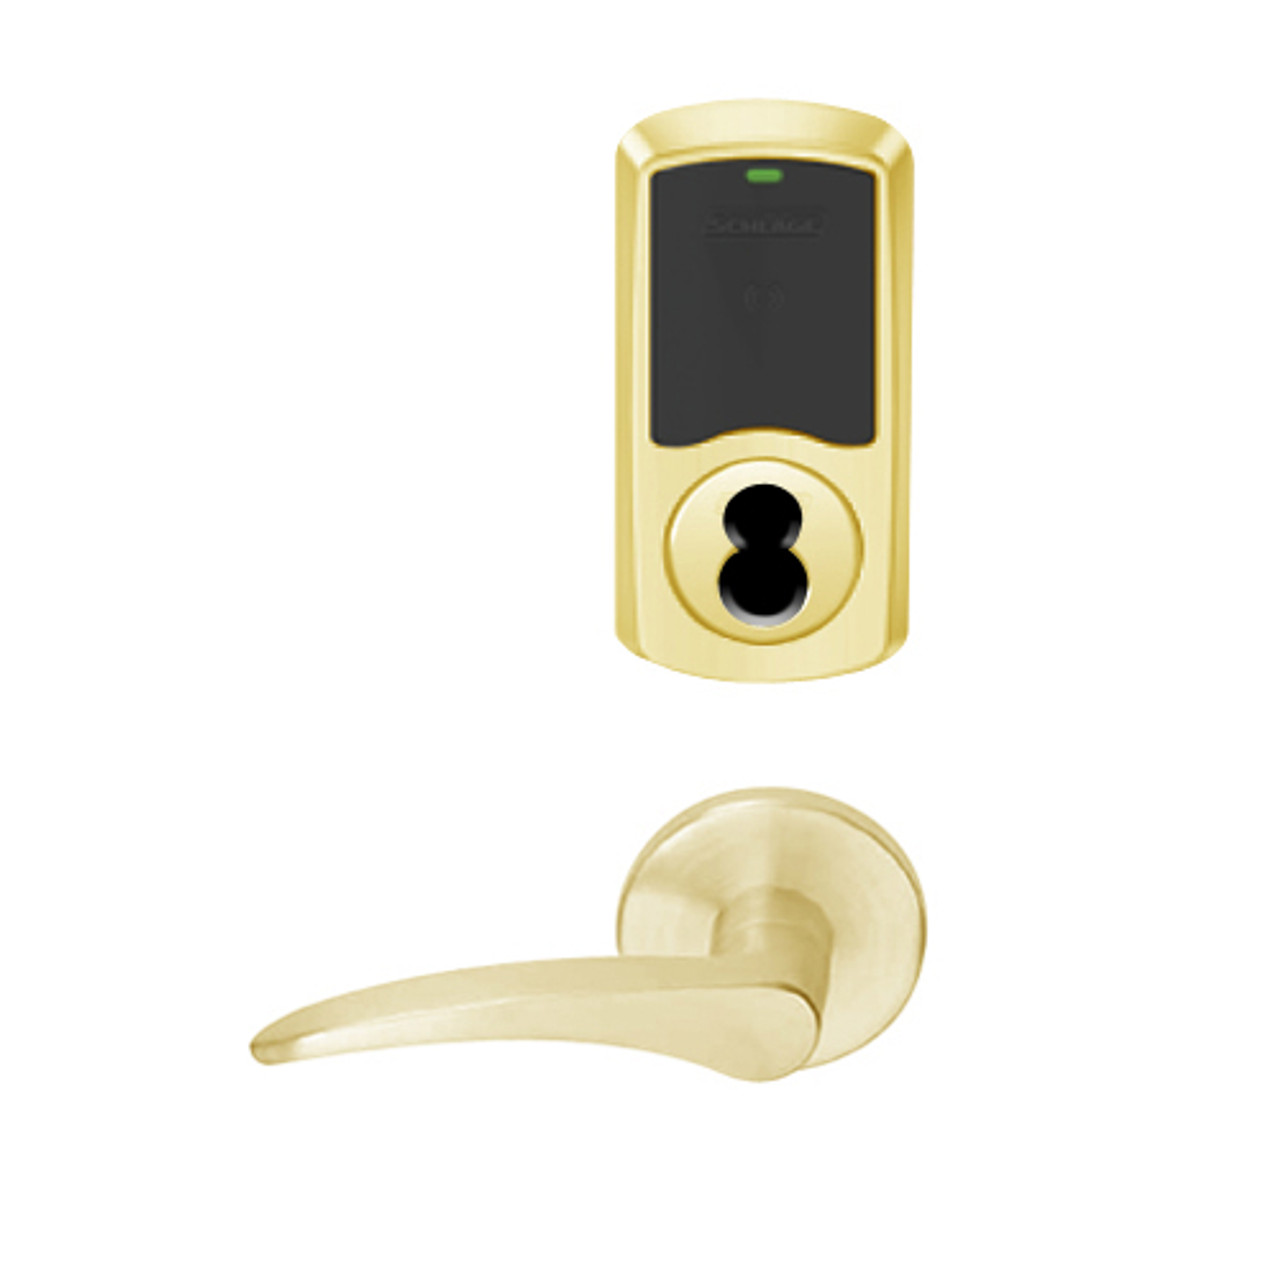 LEMD-GRW-BD-12-605-00A-RH Schlage Privacy/Apartment Wireless Greenwich Mortise Deadbolt Lock with LED and 12 Lever Prepped for SFIC in Bright Brass